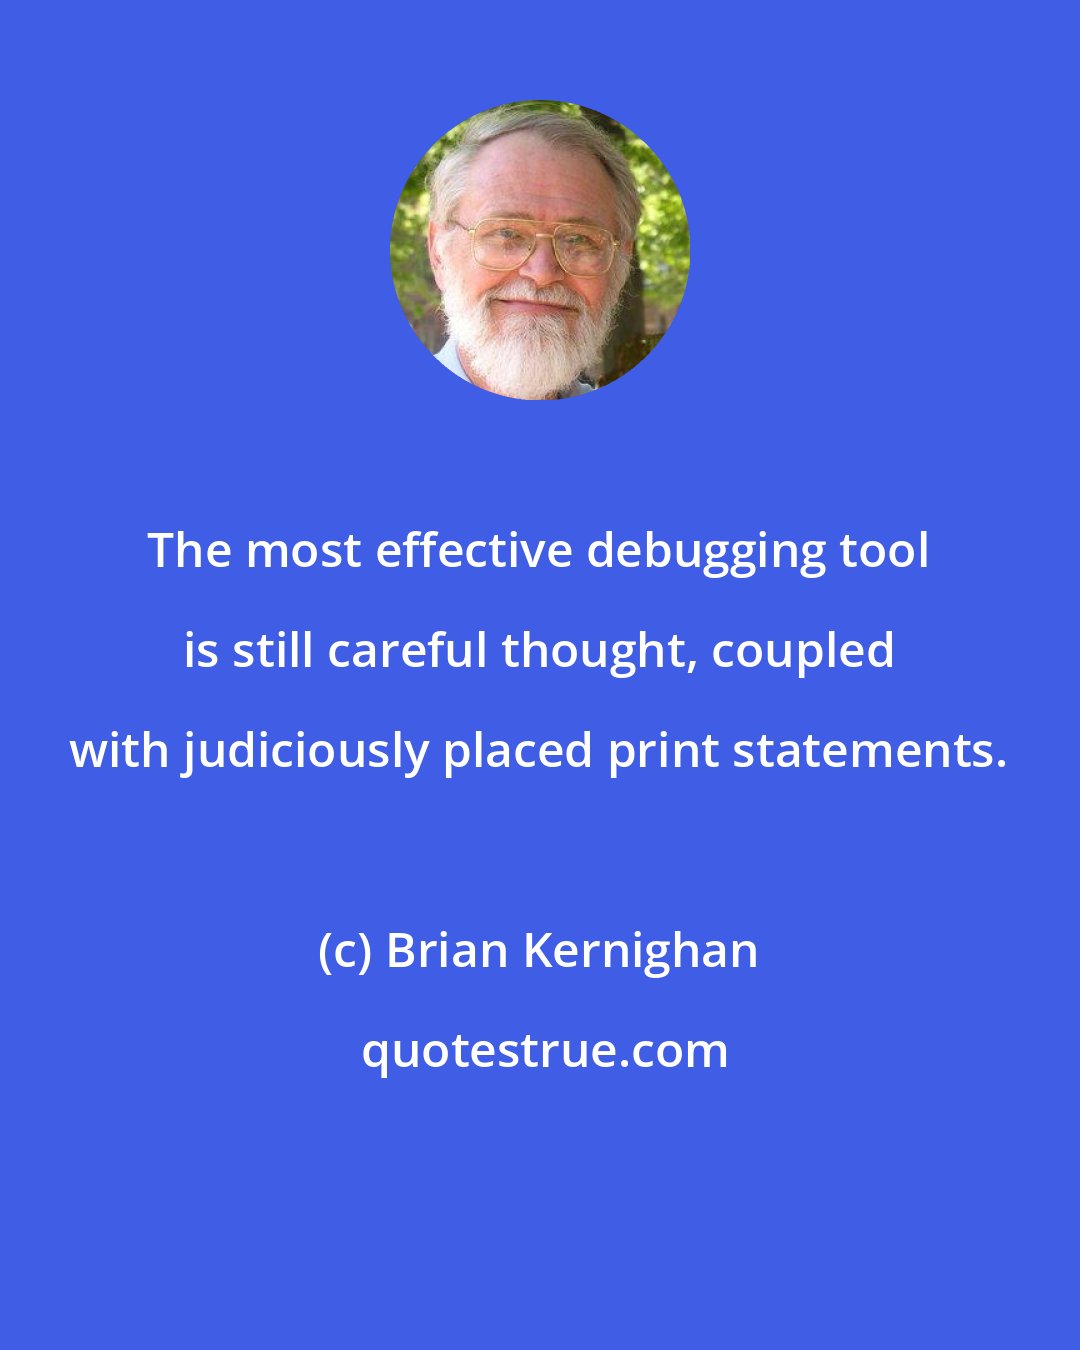 Brian Kernighan: The most effective debugging tool is still careful thought, coupled with judiciously placed print statements.